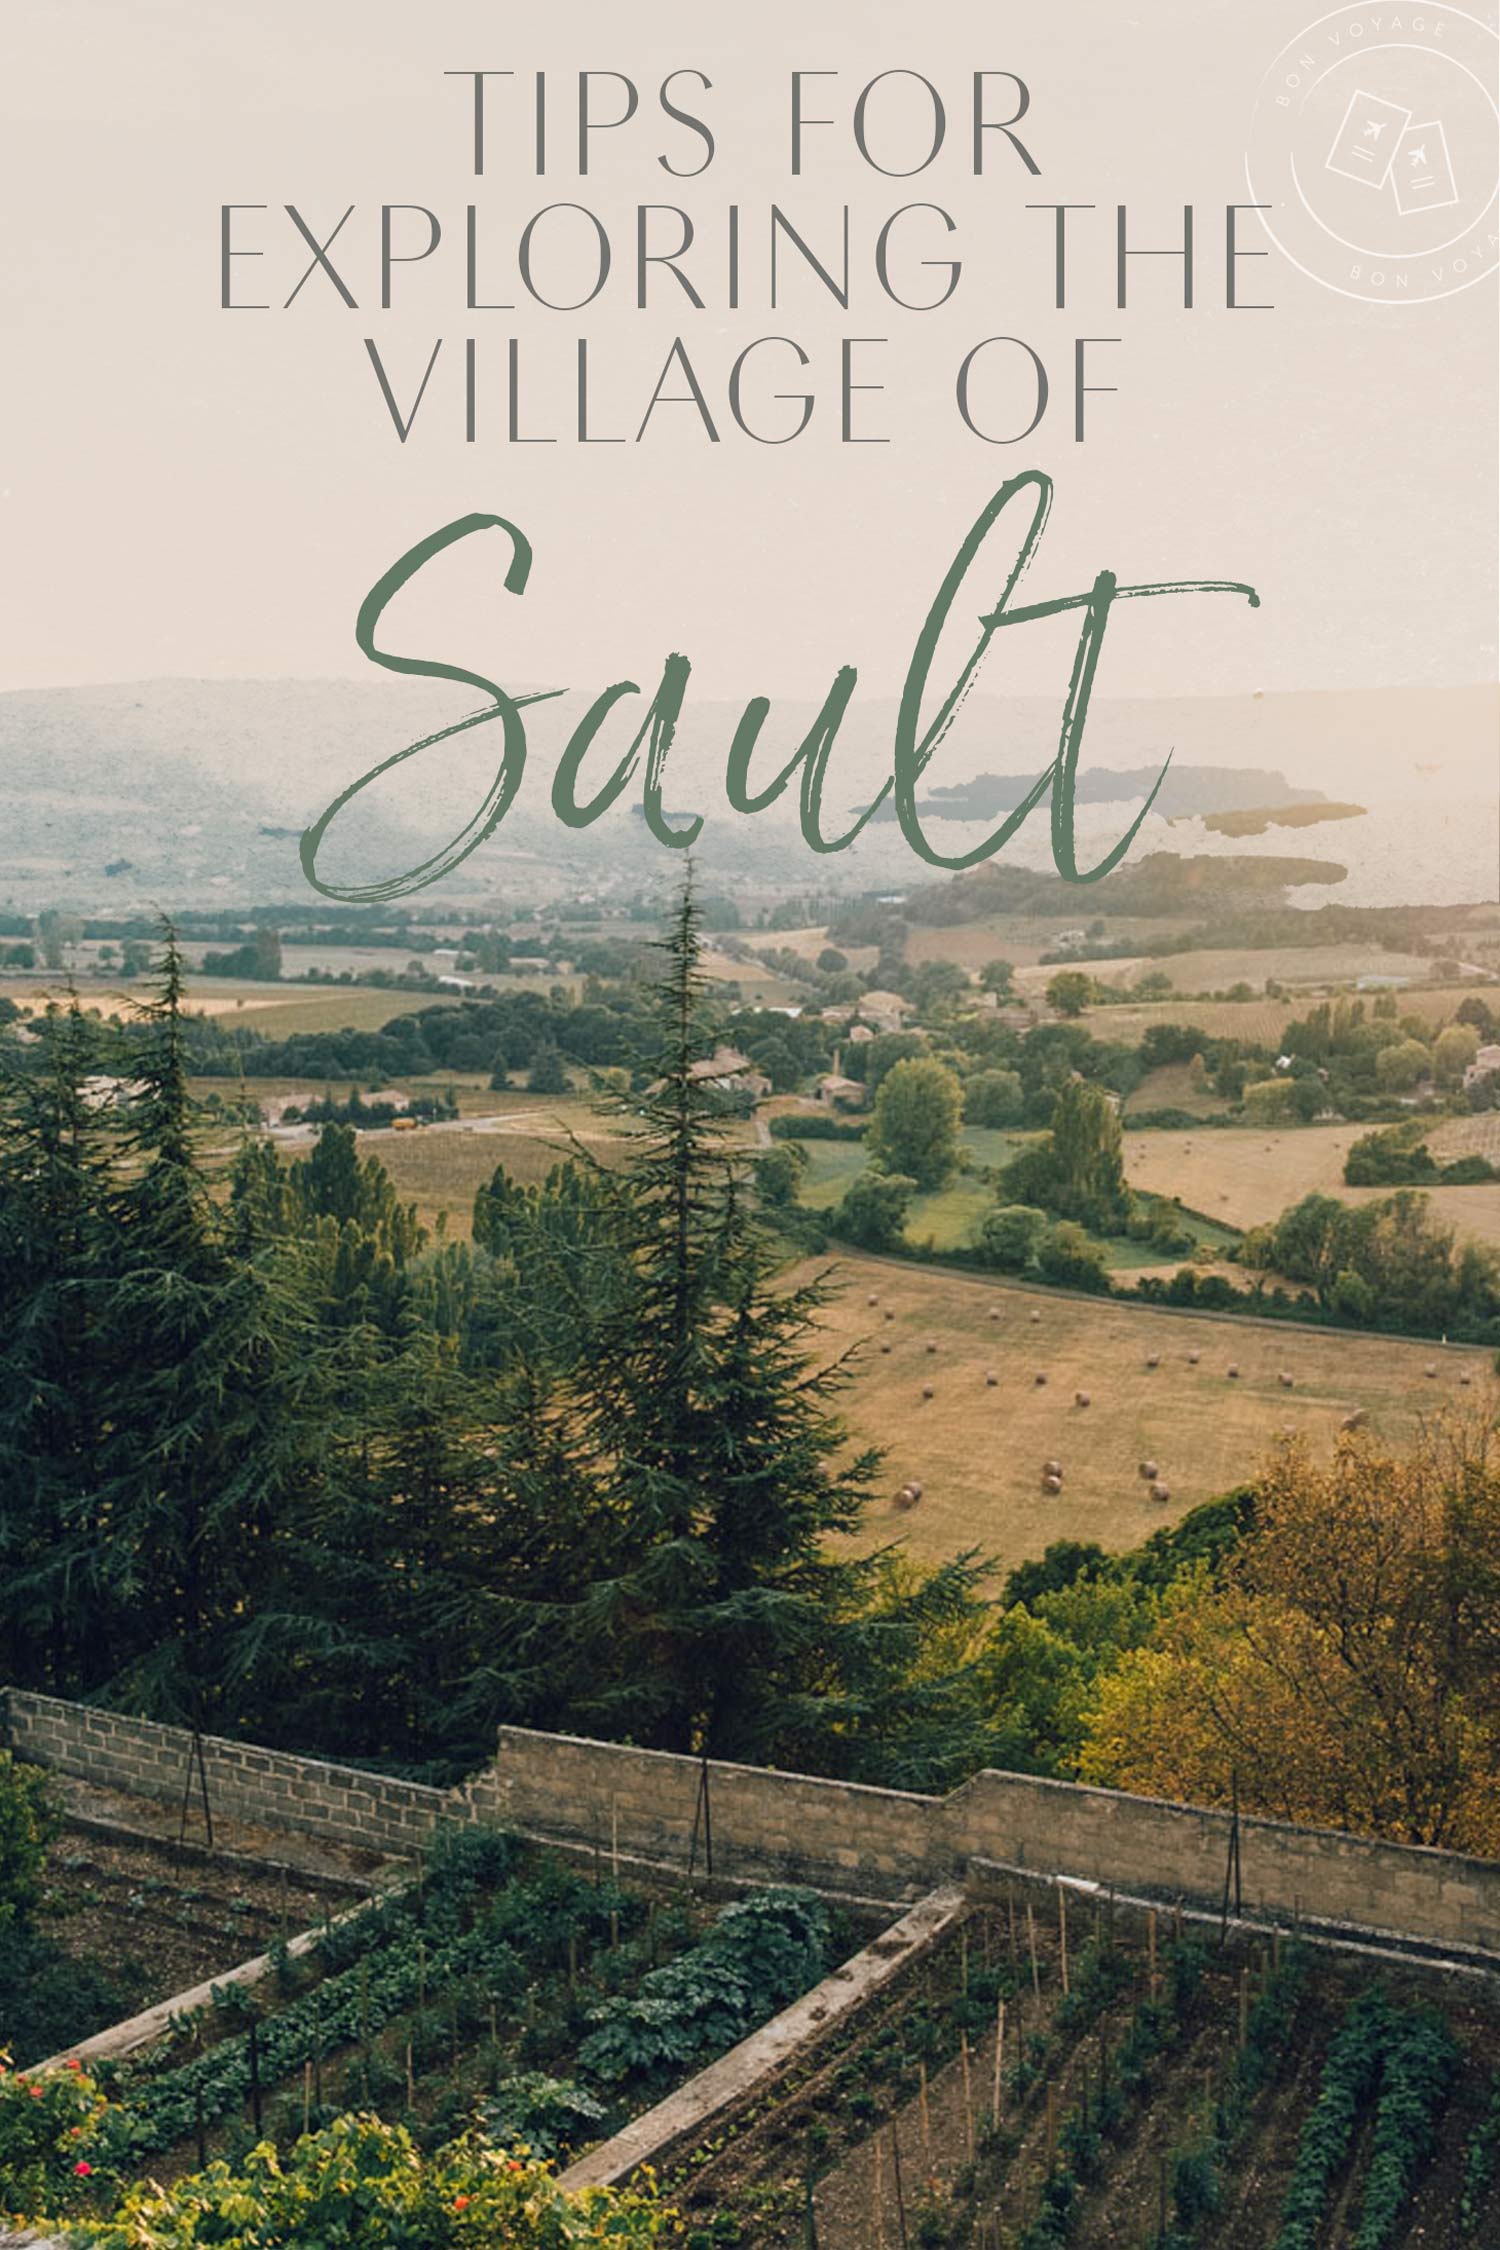 Tips for Exploring the Village of Sault